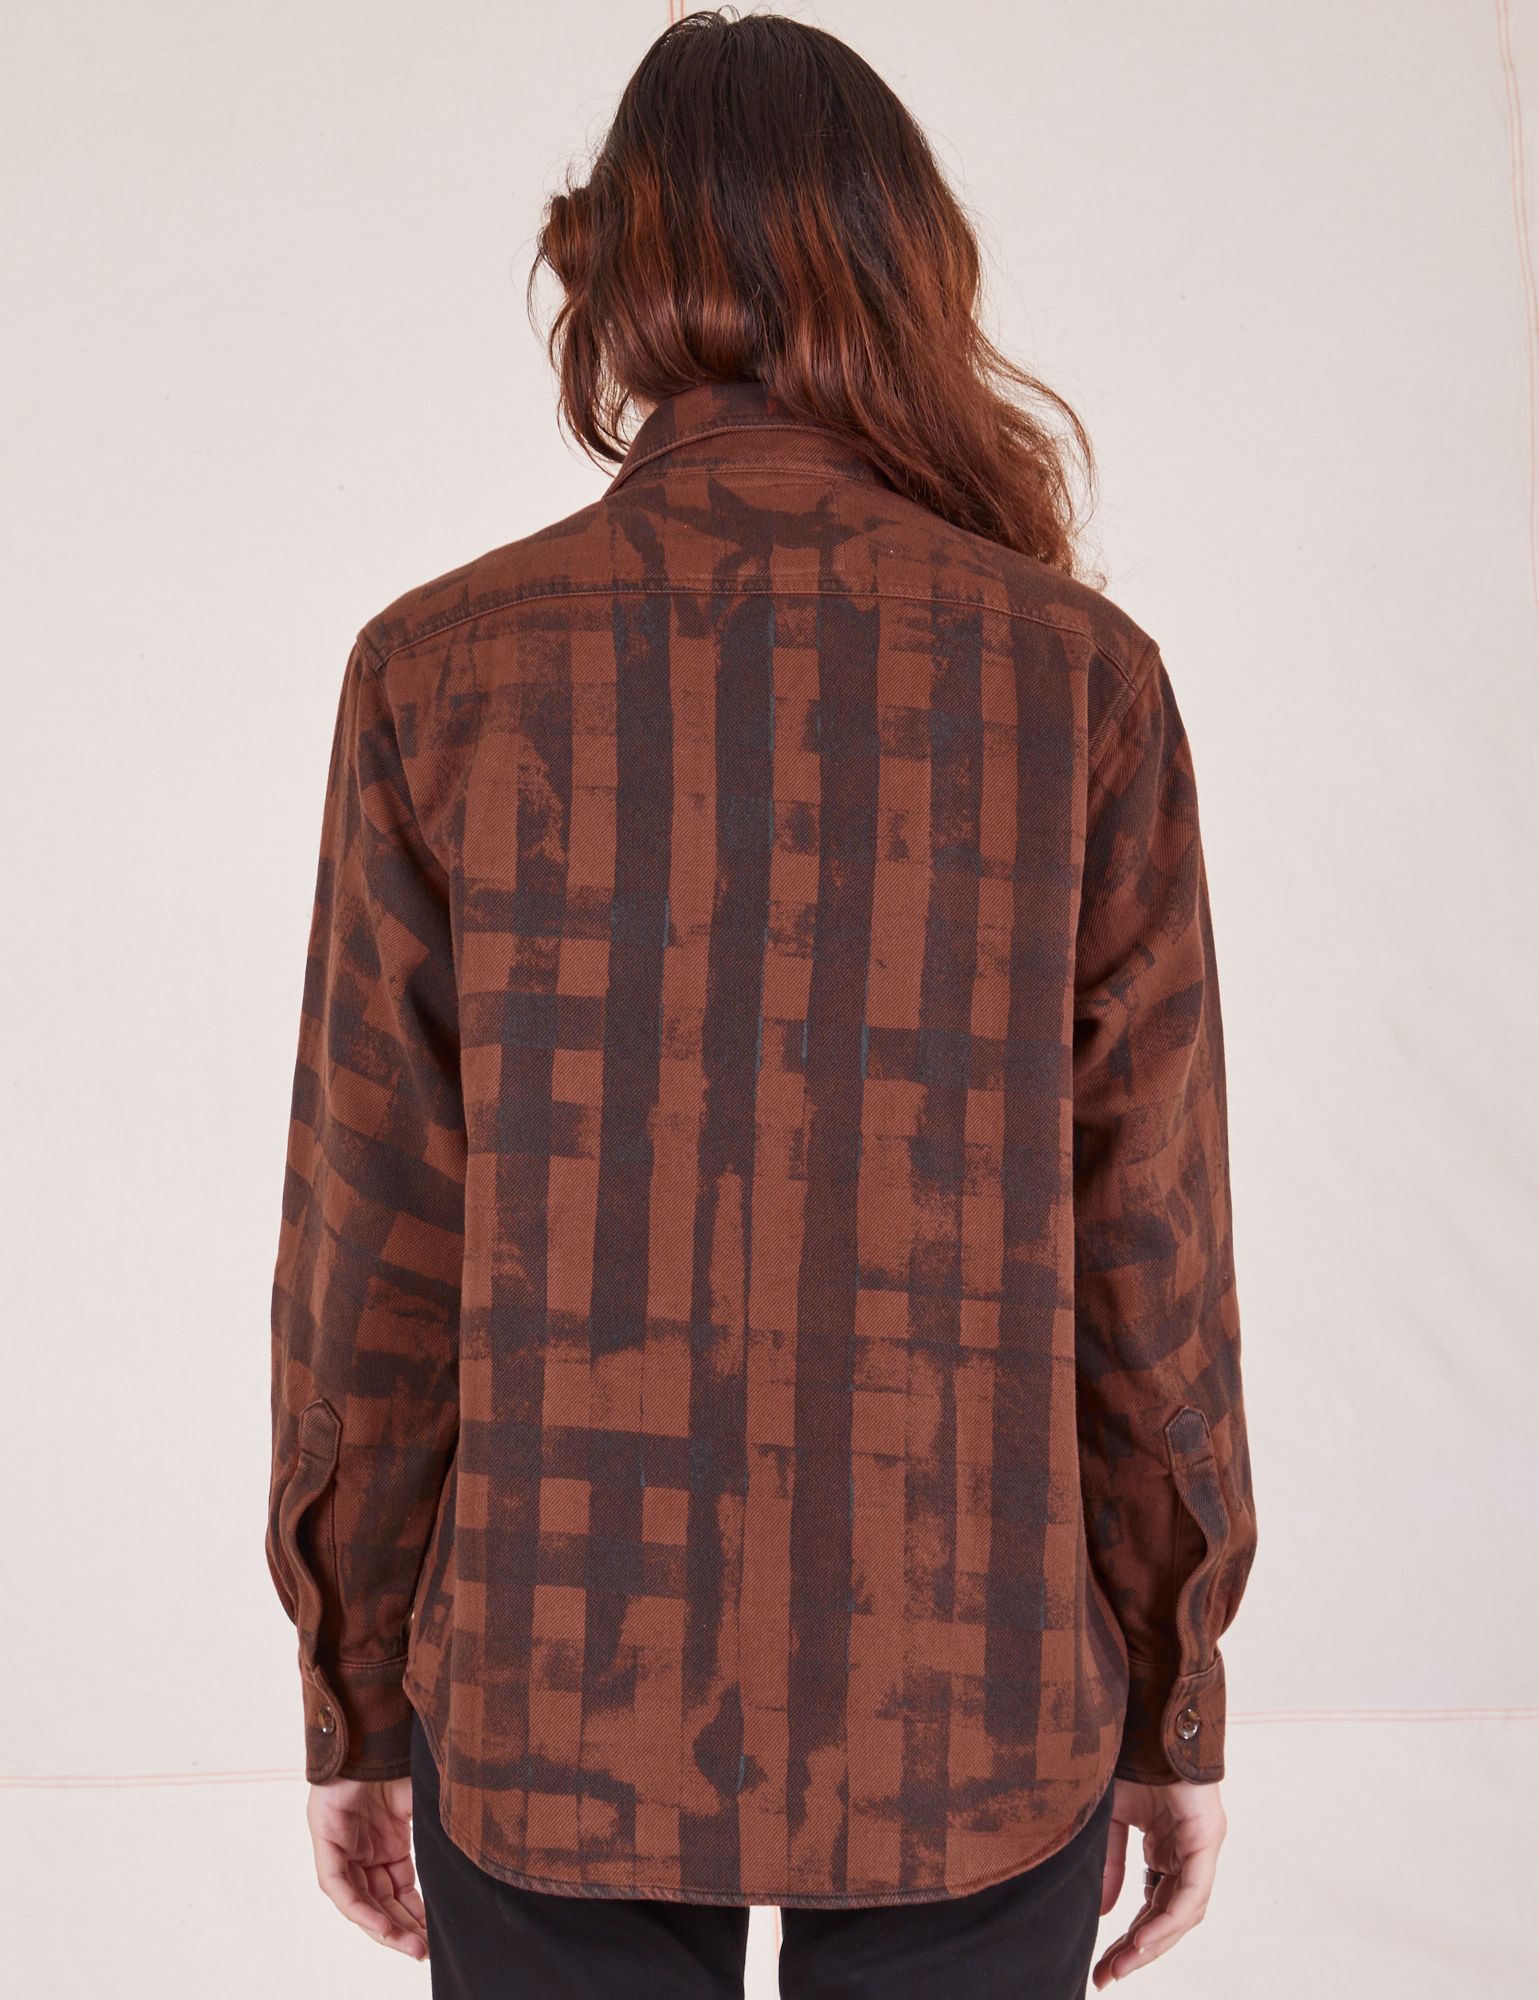 Plaid Flannel Overshirt in Fudgesicle Brown back view on Alex